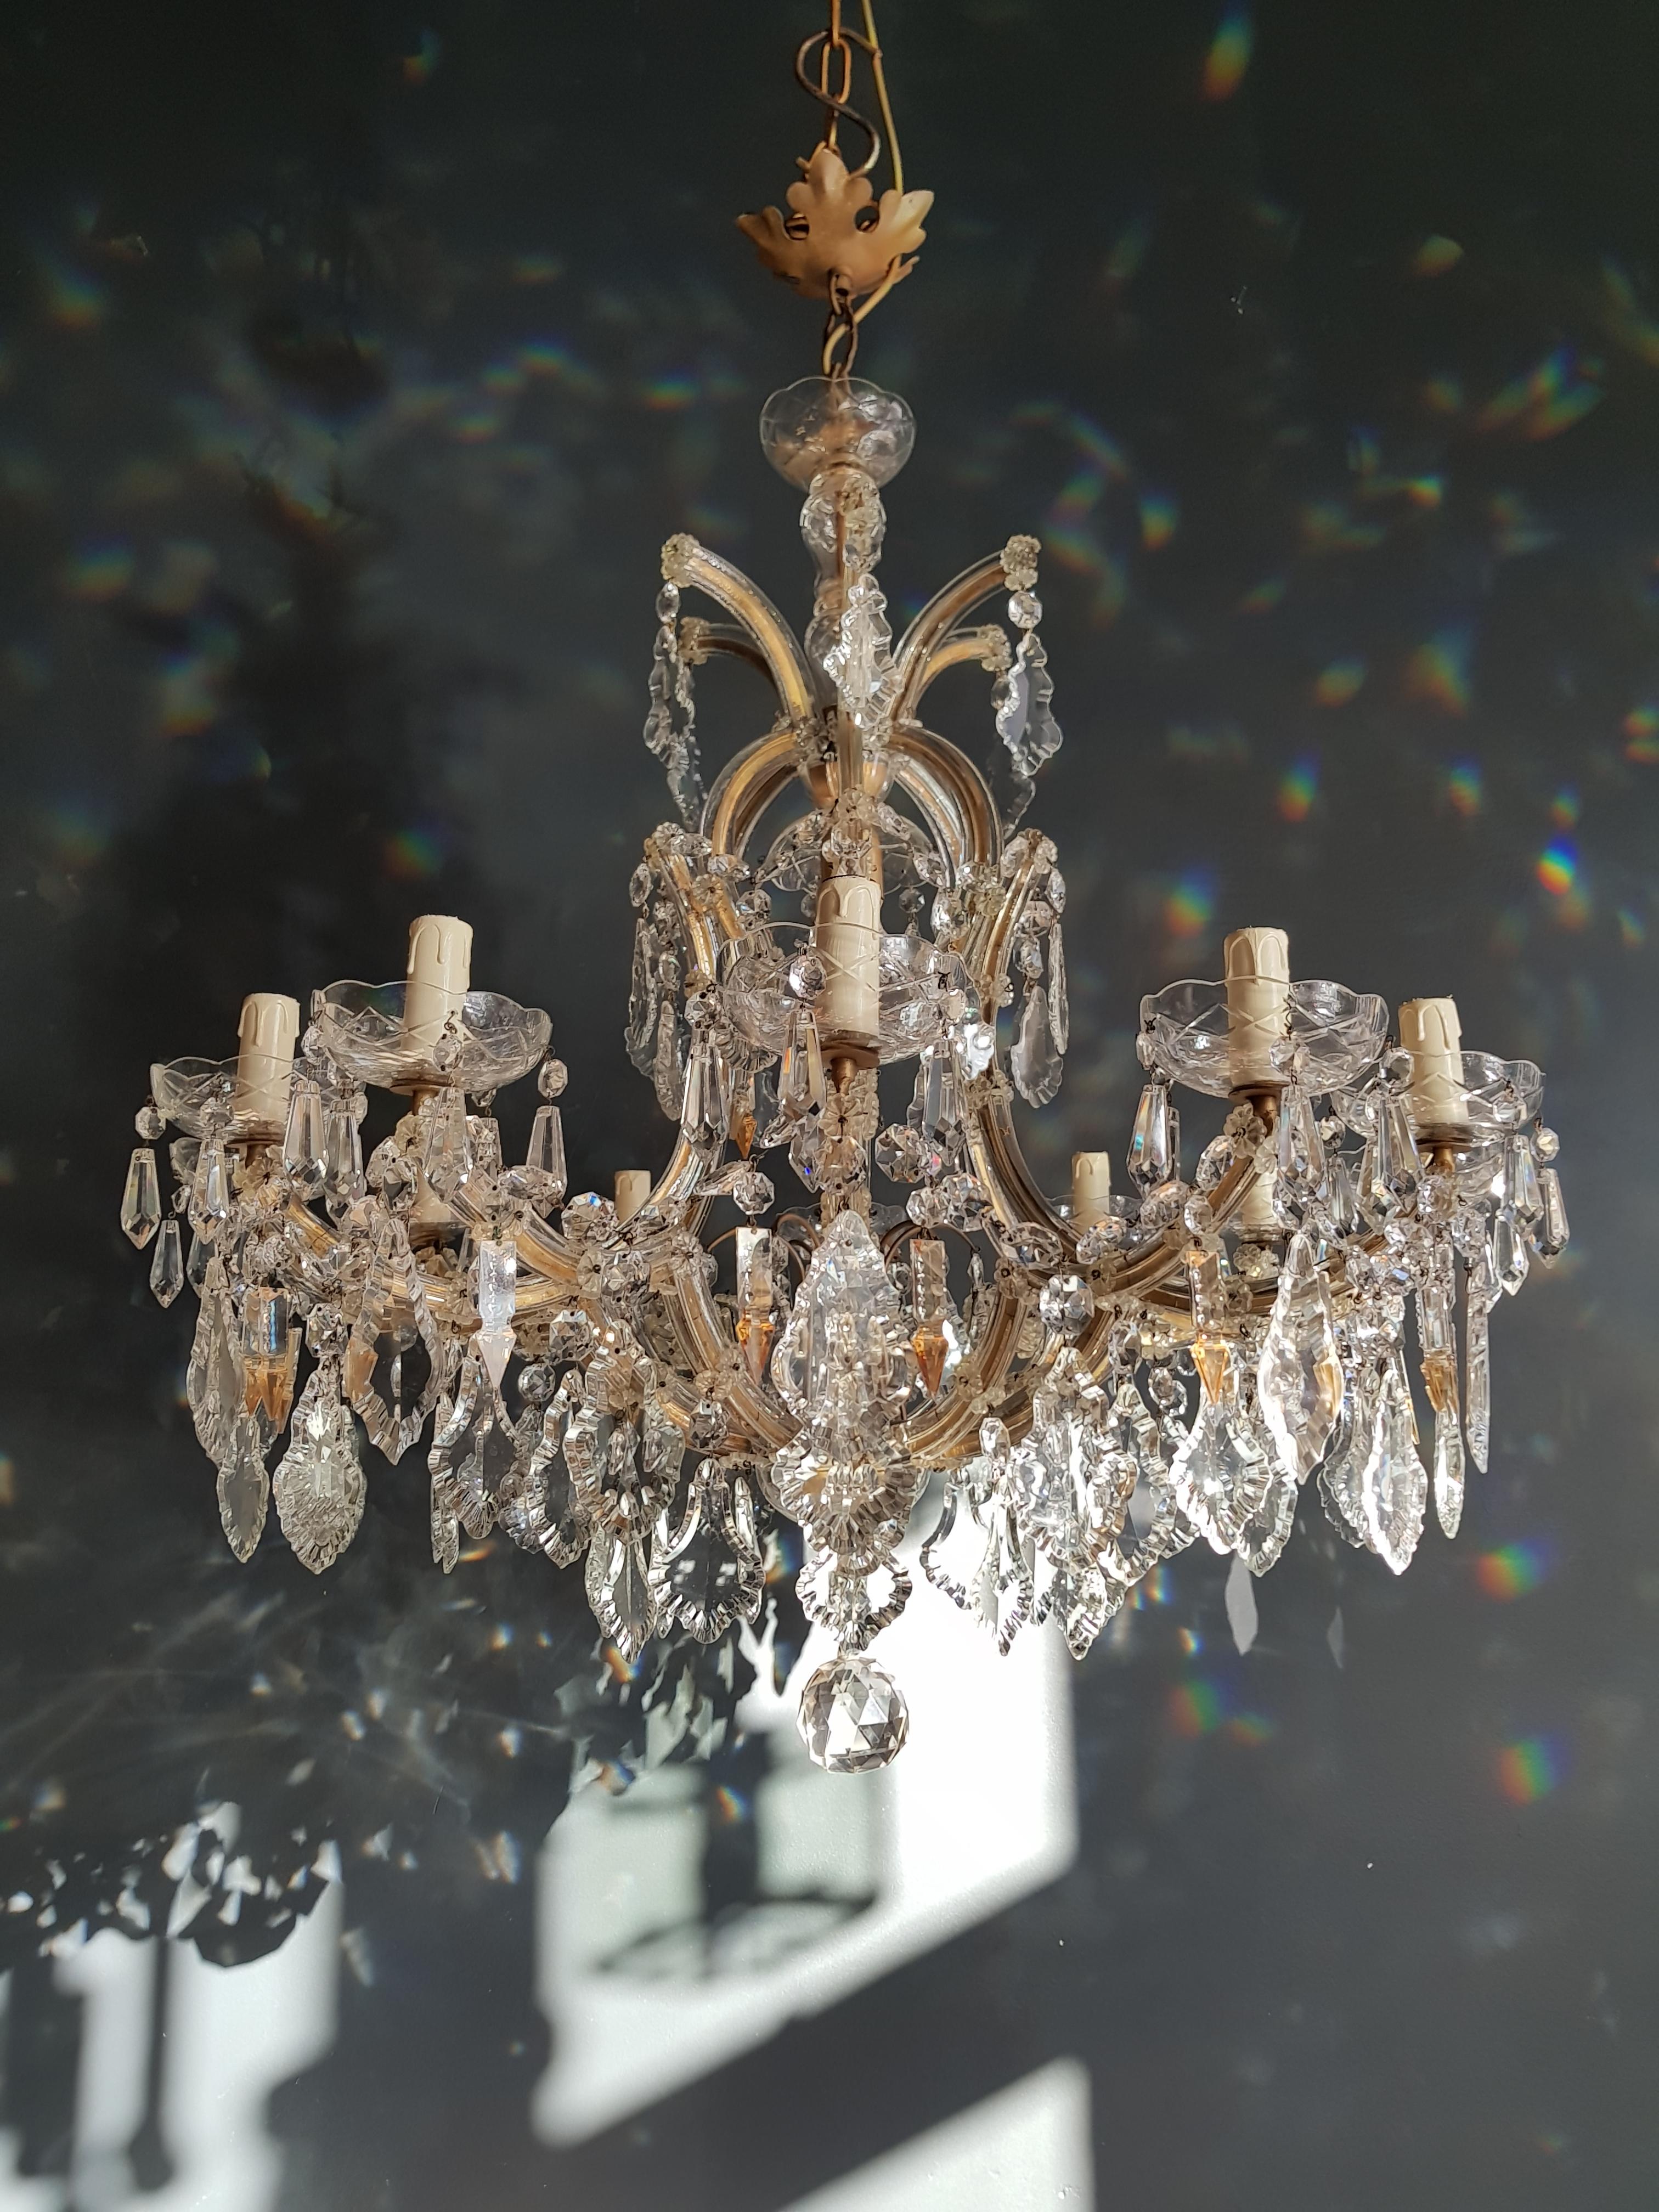 The frame is fully dressed all-over with glass. Cut crystal drops of different dimensions and shapes are hanging all-over the octagonal button chains, all around the chandelier.

Measures: Total height 150 cm, height without chain 90 cm, diameter